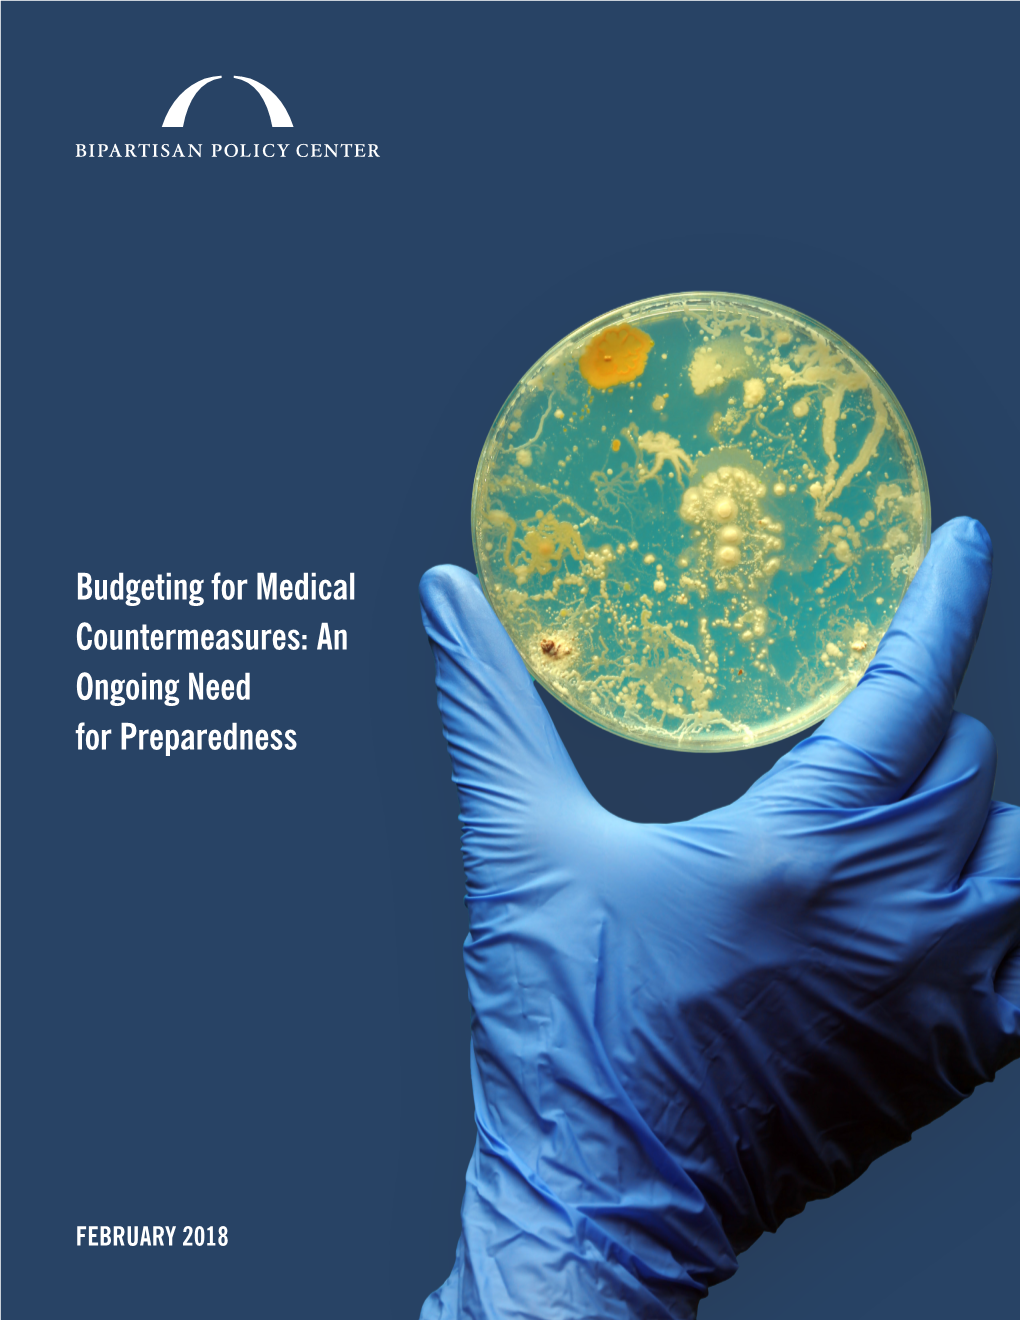 Budgeting for Medical Countermeasures: an Ongoing Need for Preparedness